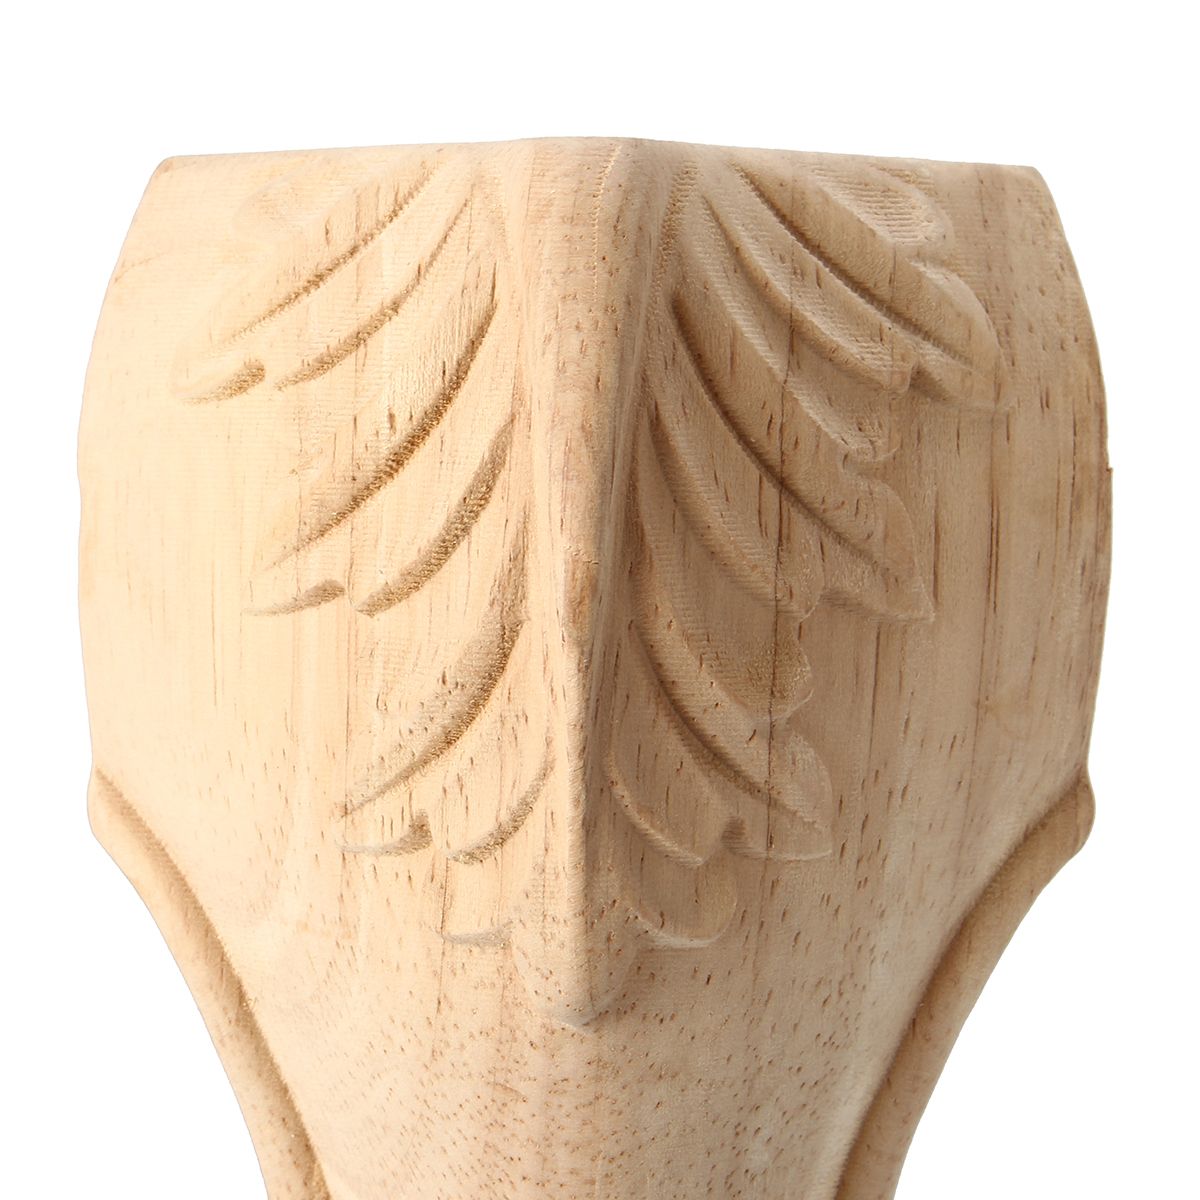 4Pcs-1015cm-European-Solid-Wood-Applique-Carving-Furniture-Foot-Legs-Unpainted-Cabinet-Feets-Decal-1322685